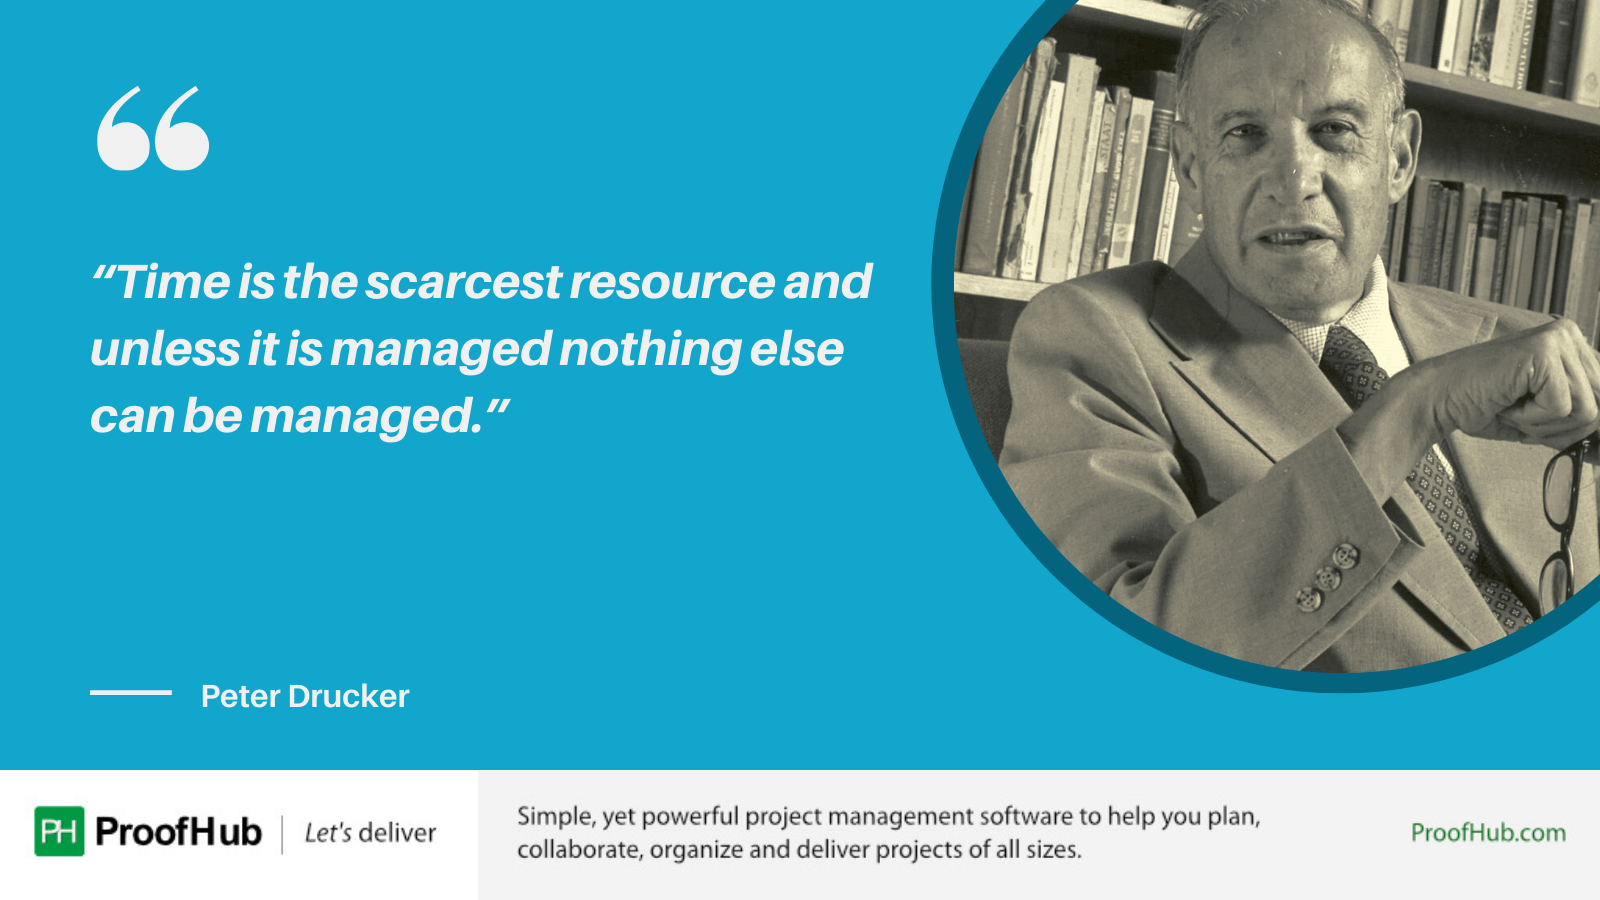 Time is the scarcest resource and unless it is managed nothing else can be managed quote by Peter Drucker